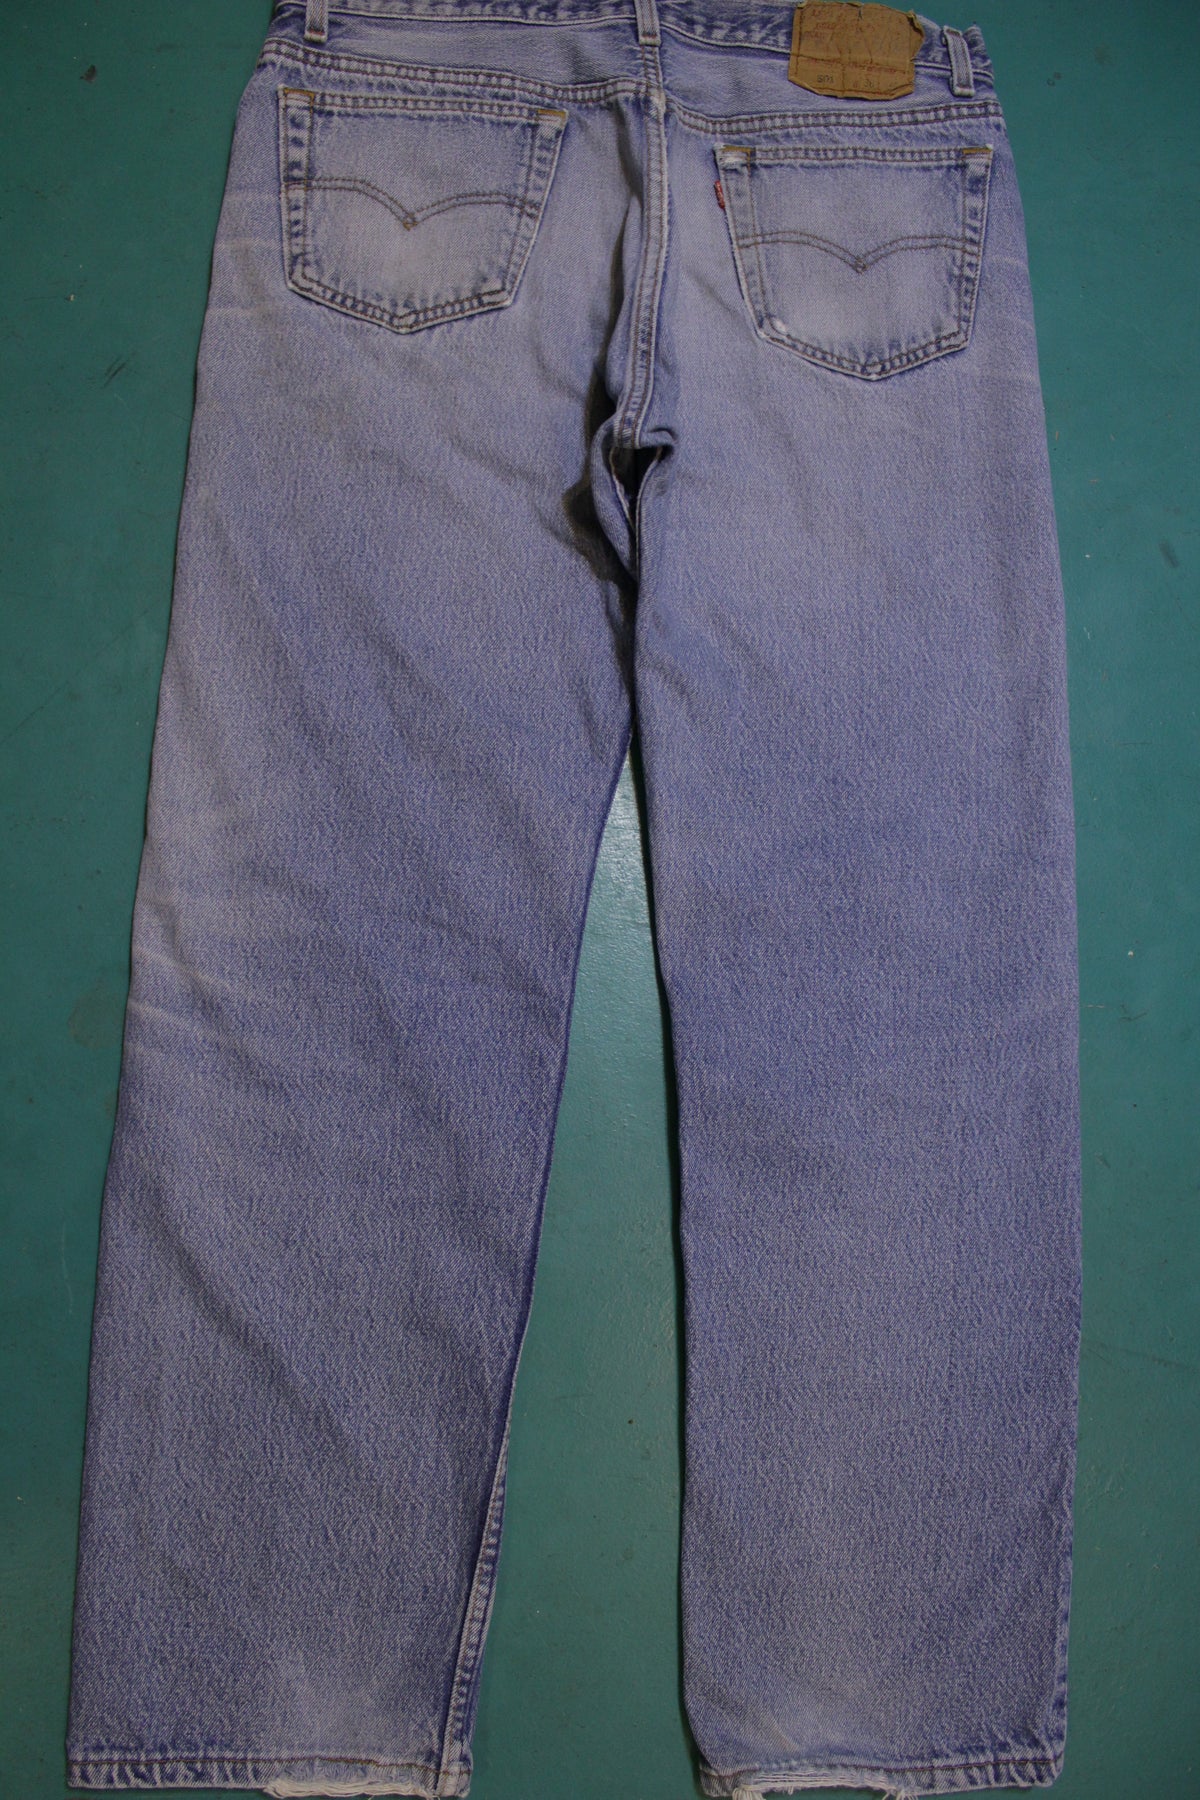 Levis 501 Button Fly 80s Red Tag Made in USA Vintage Faded Denim Jeans 34x29